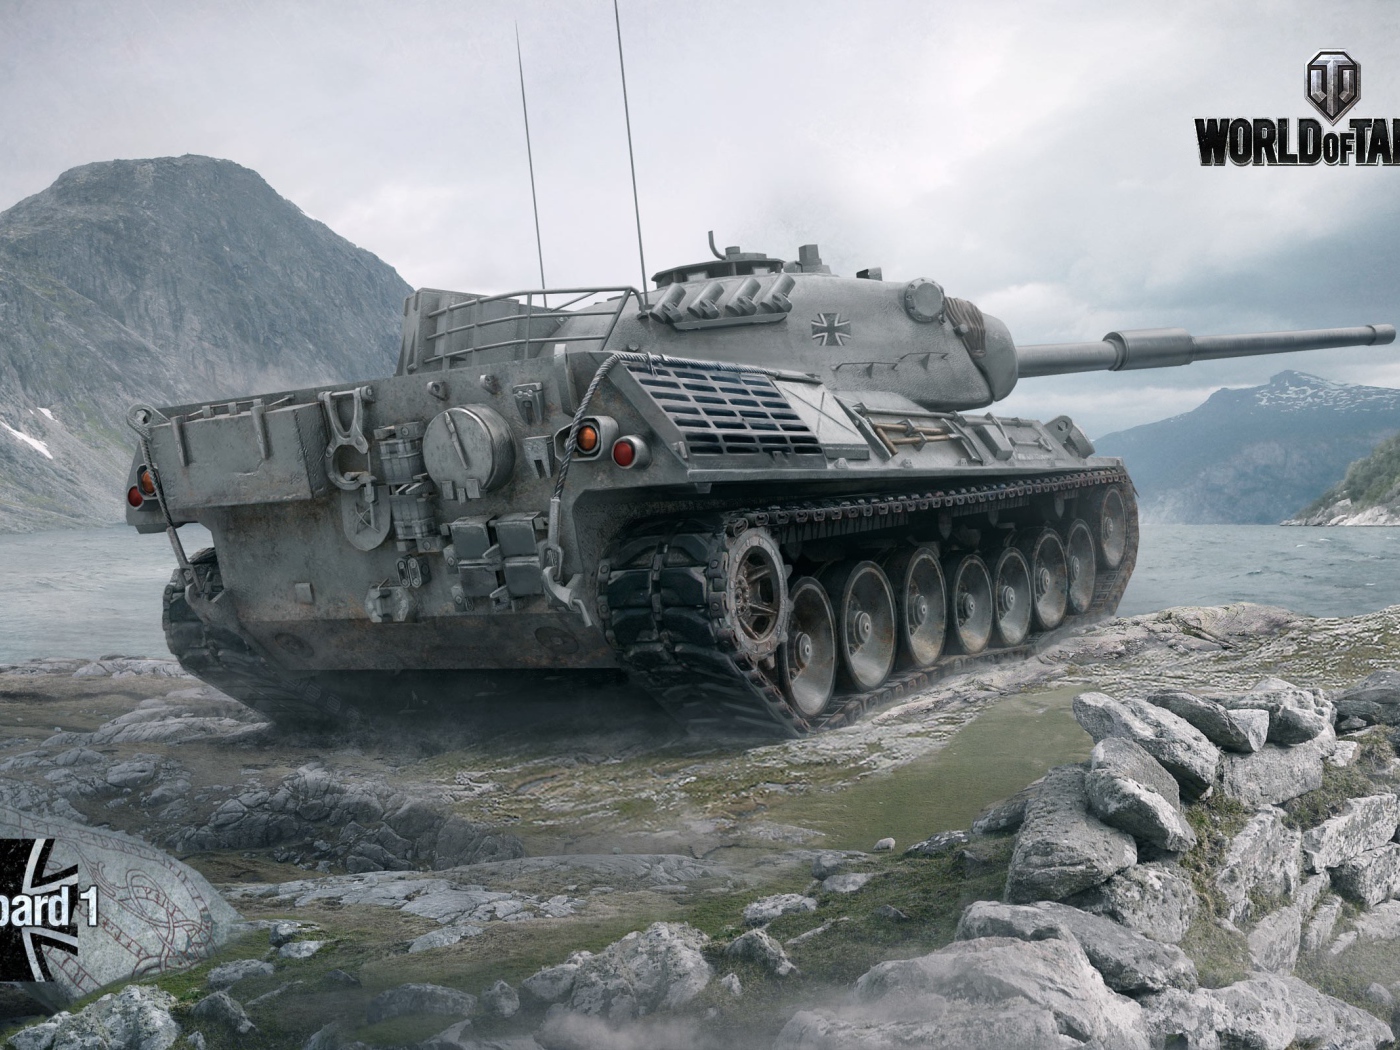 German Leopard 1 in the river, the game World of Tanks